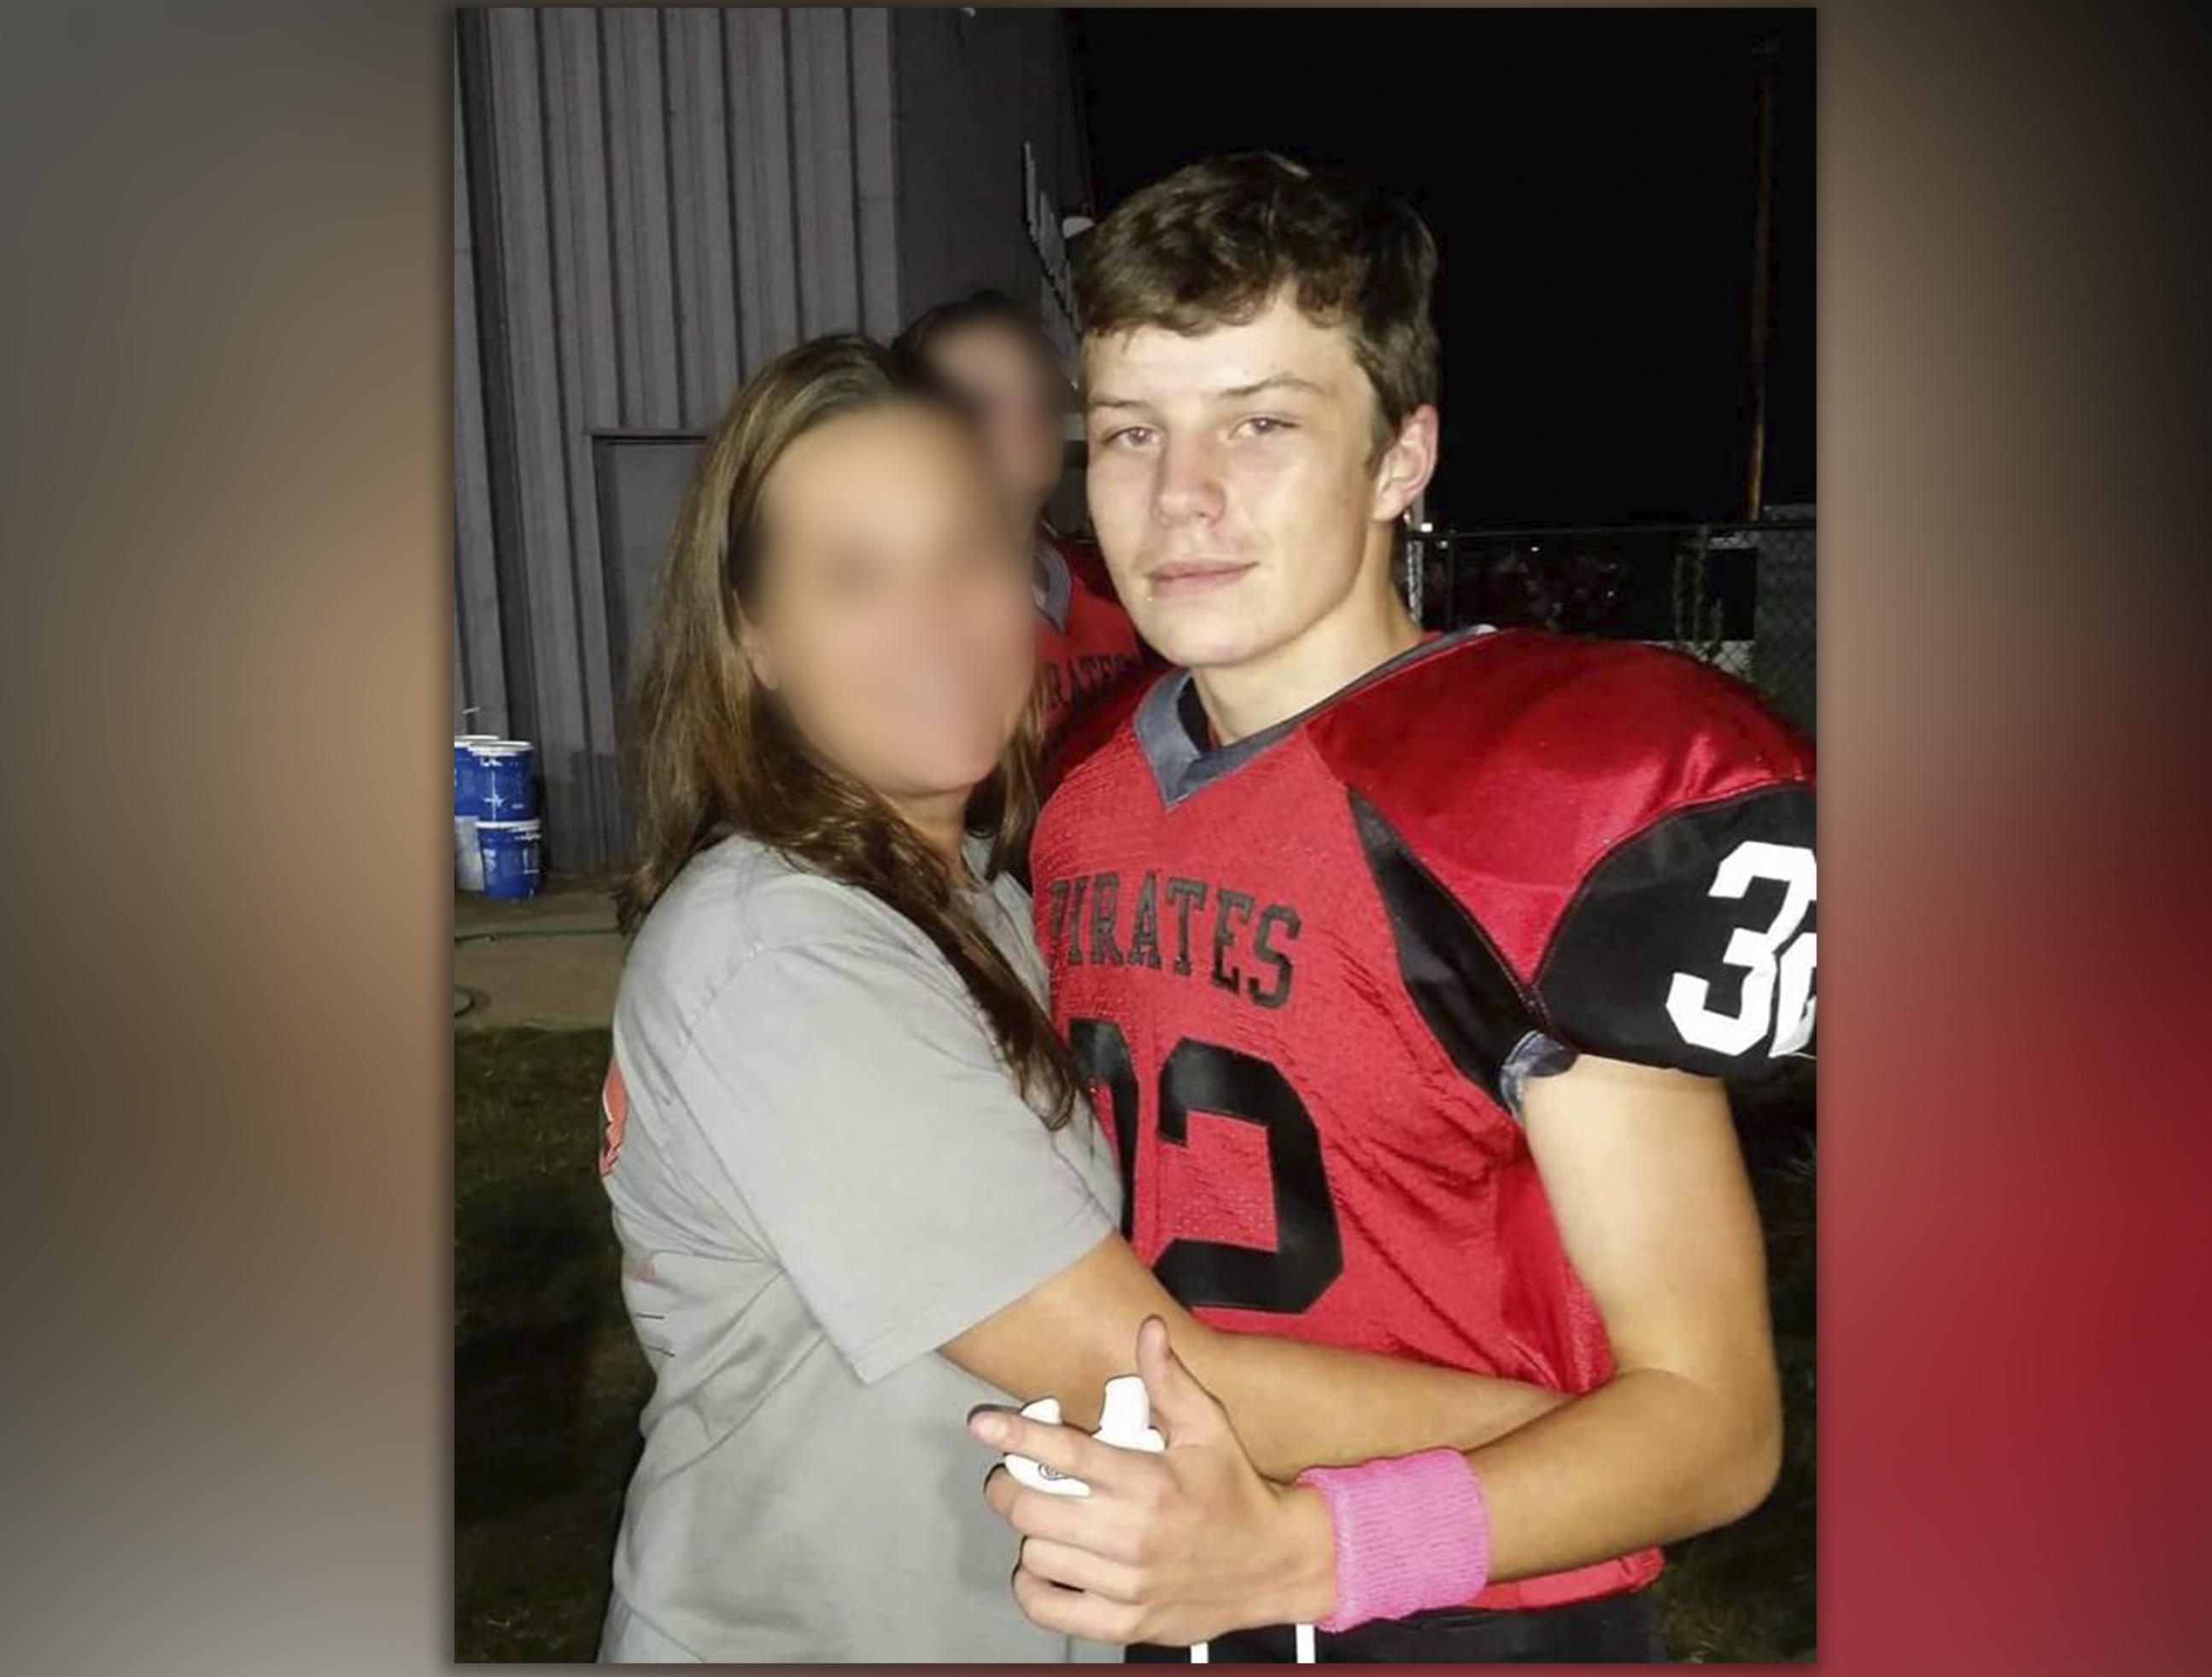 Dylan Thomas Pike County High school football player died from